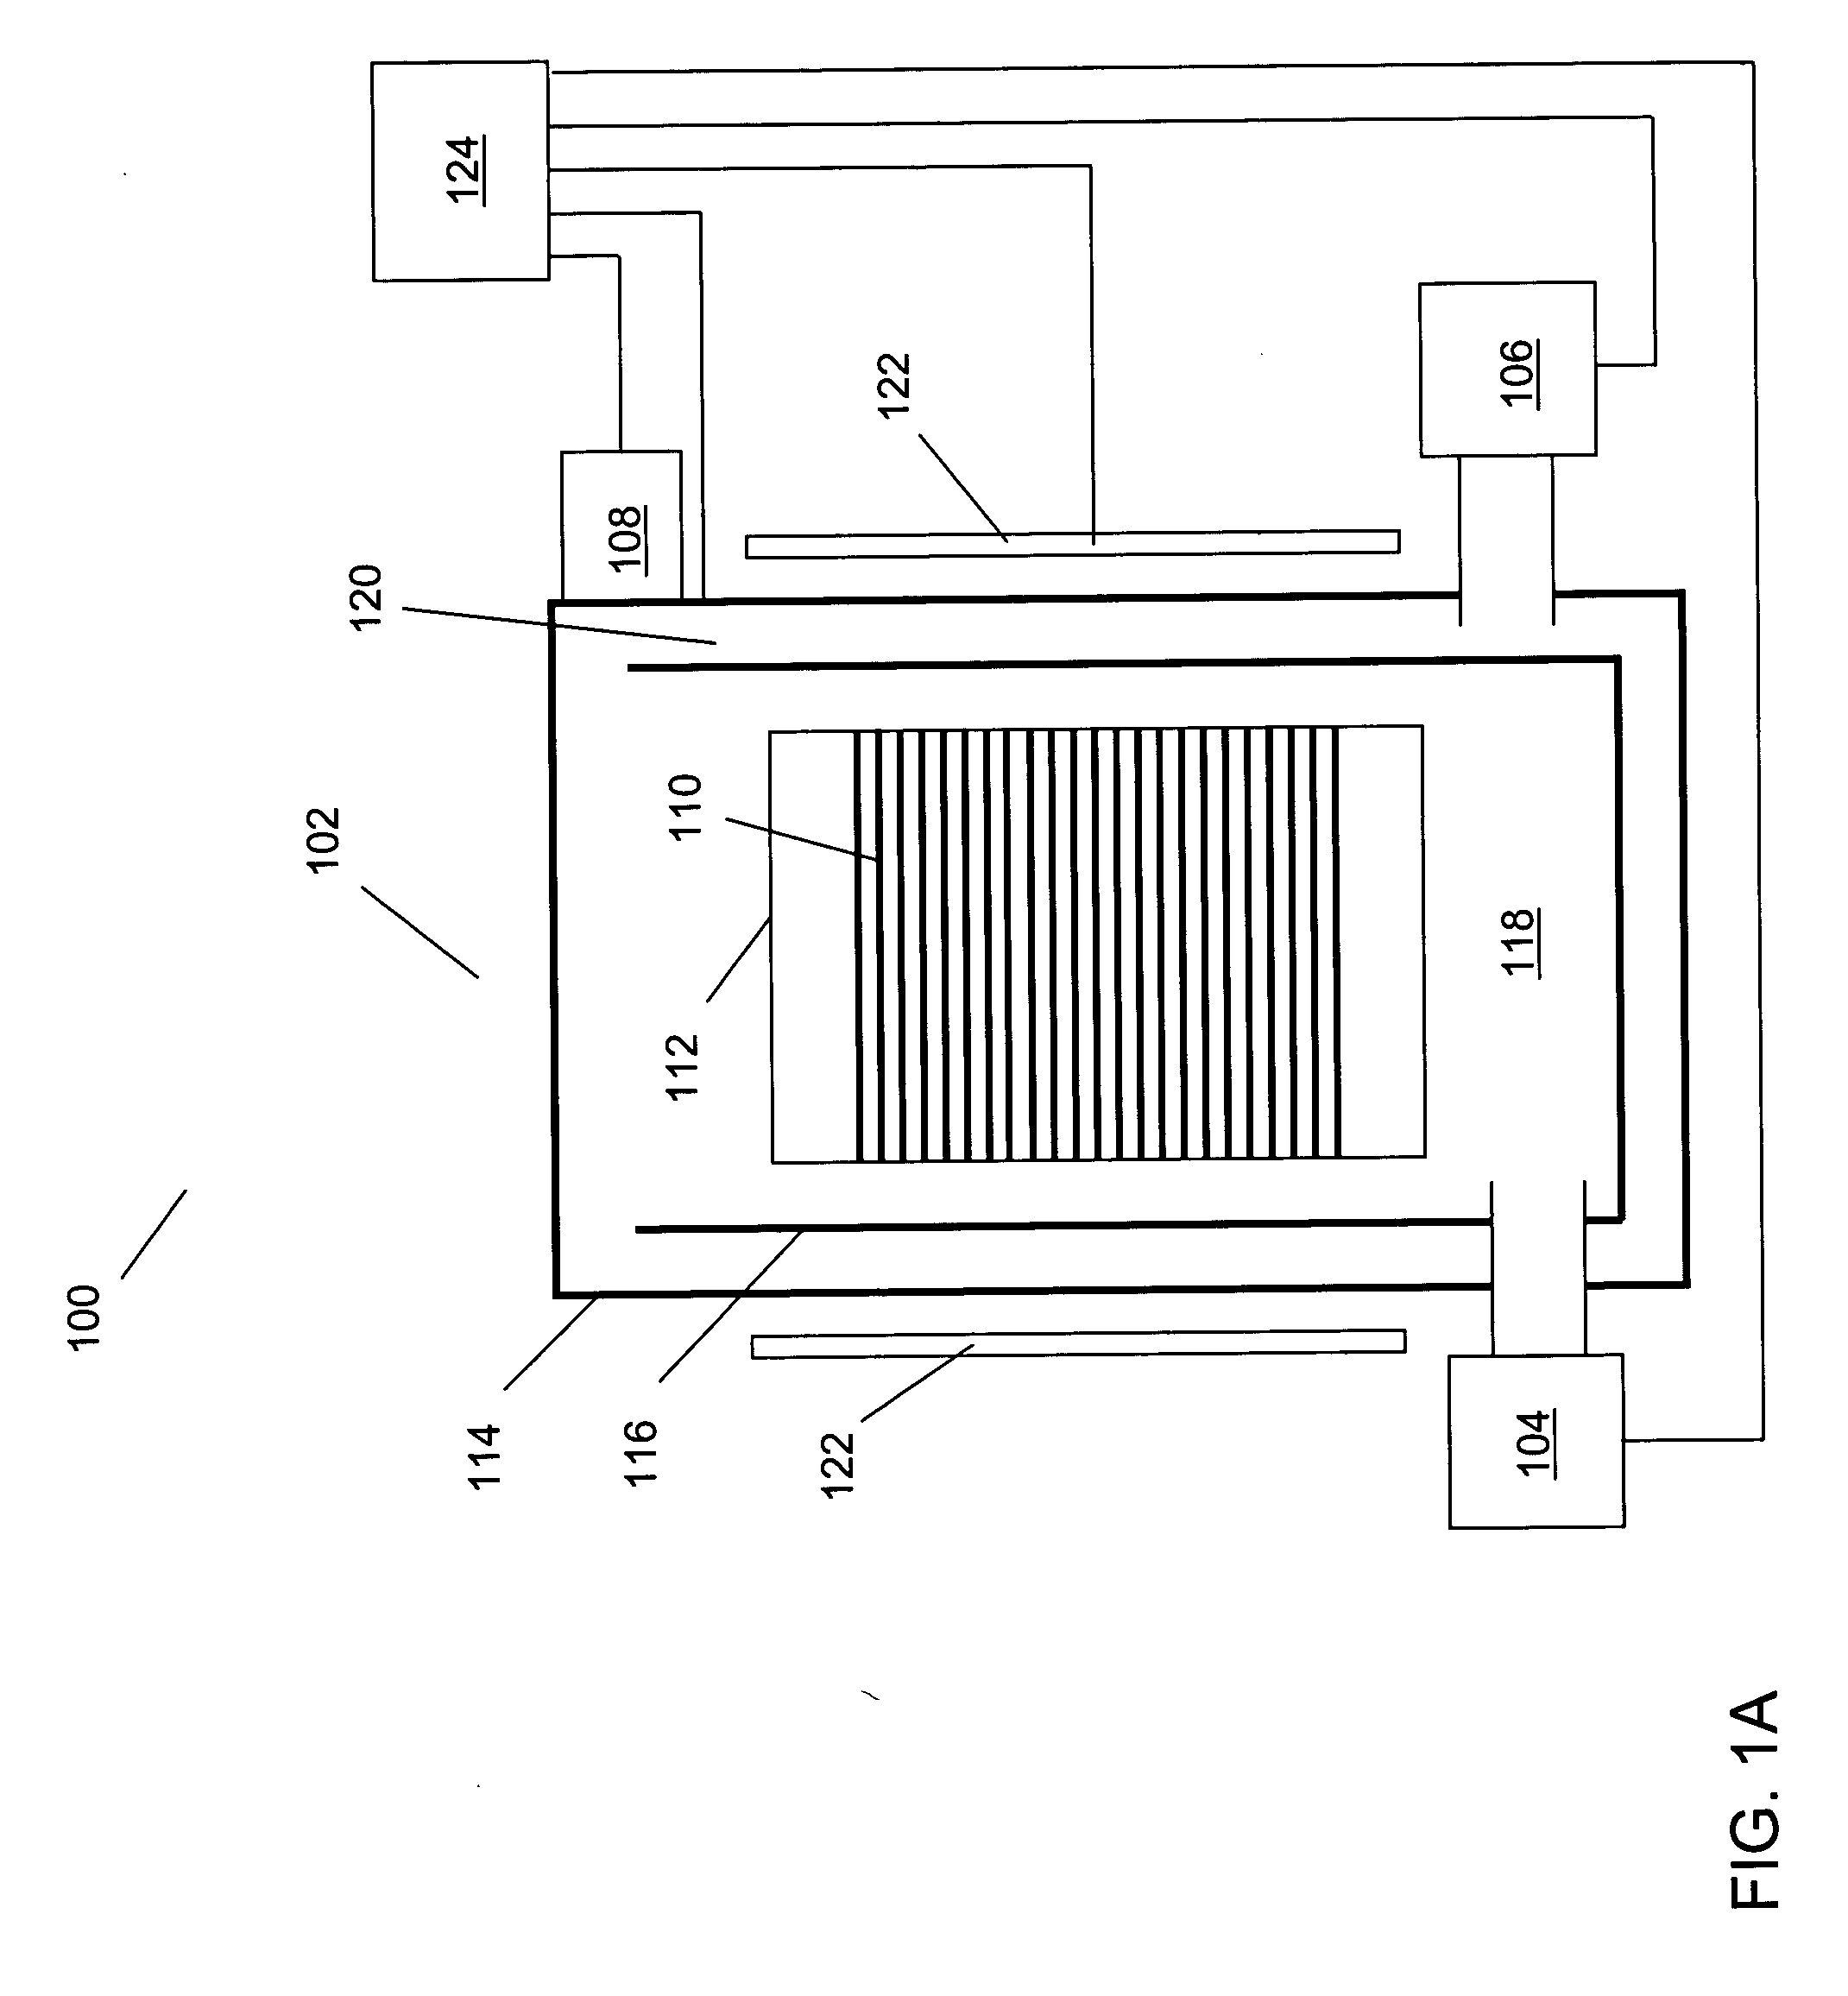 Method for monitoring status of system components